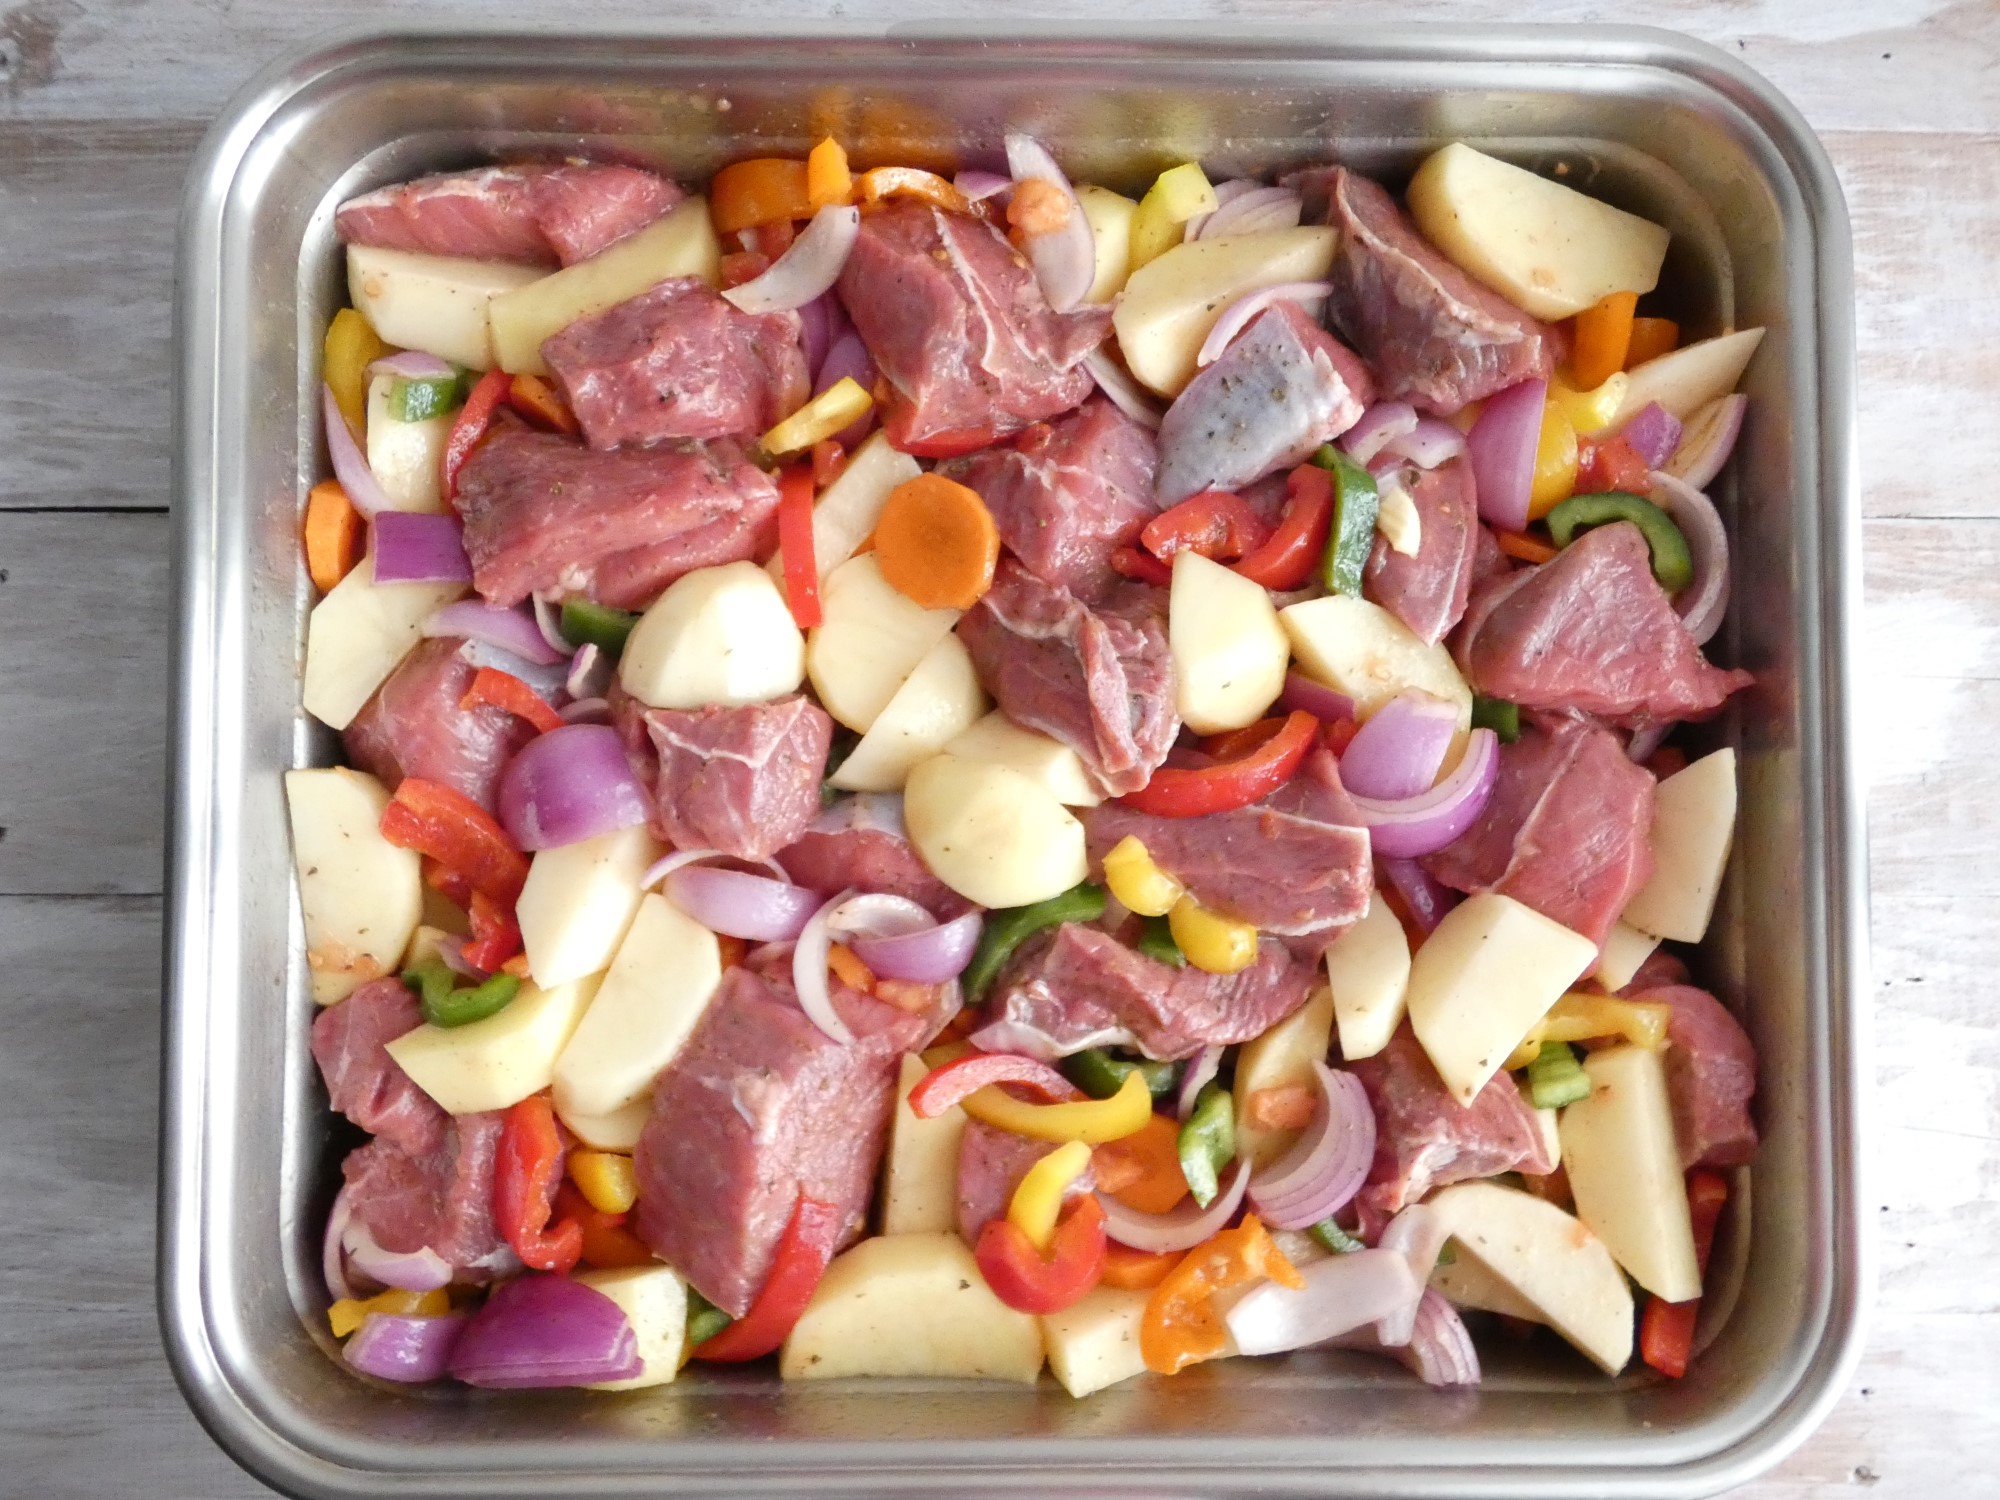 Oven roasted beef with vegetables